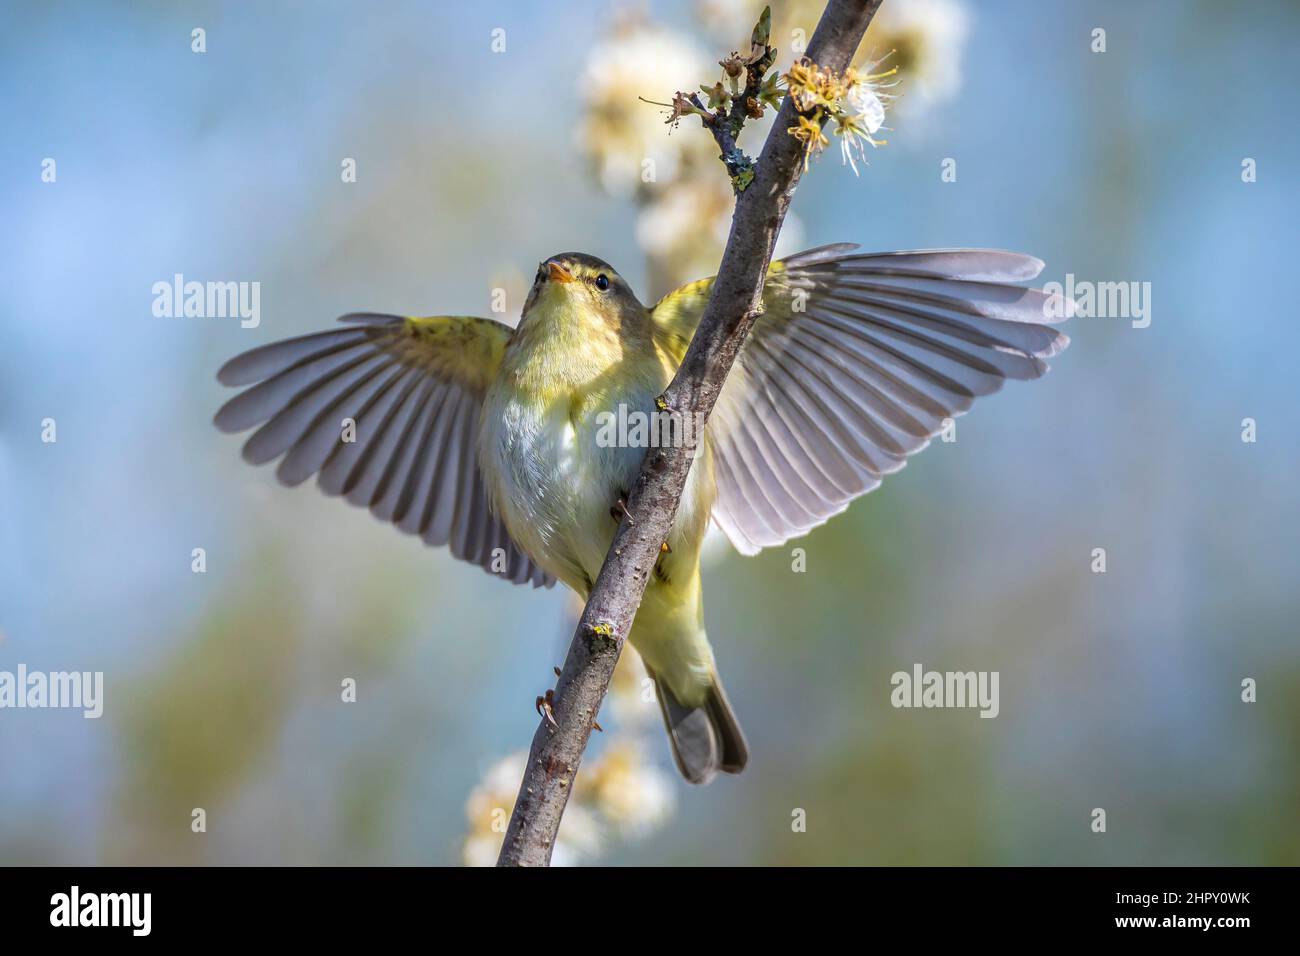 Close-up of a Willow warbler bird, Phylloscopus trochilus, singing on a beautiful summer evening with soft backlight on a green vibrant background. Stock Photo